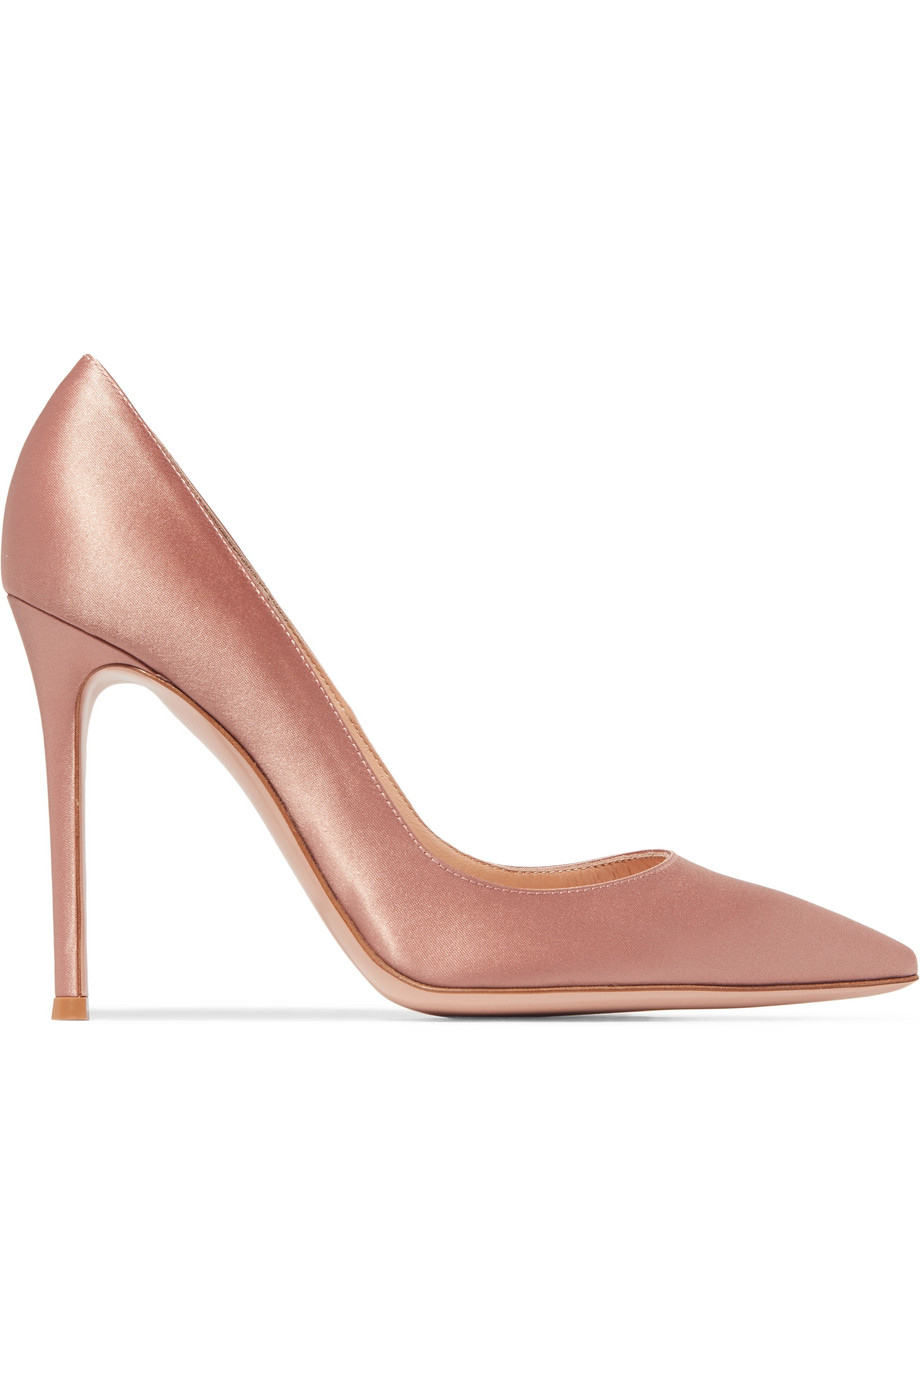 Public Desire Adore Pale Pink Satin Square Toe Barely There Ankle Wrap  Heart Shape Stiletto Heels | Lyst